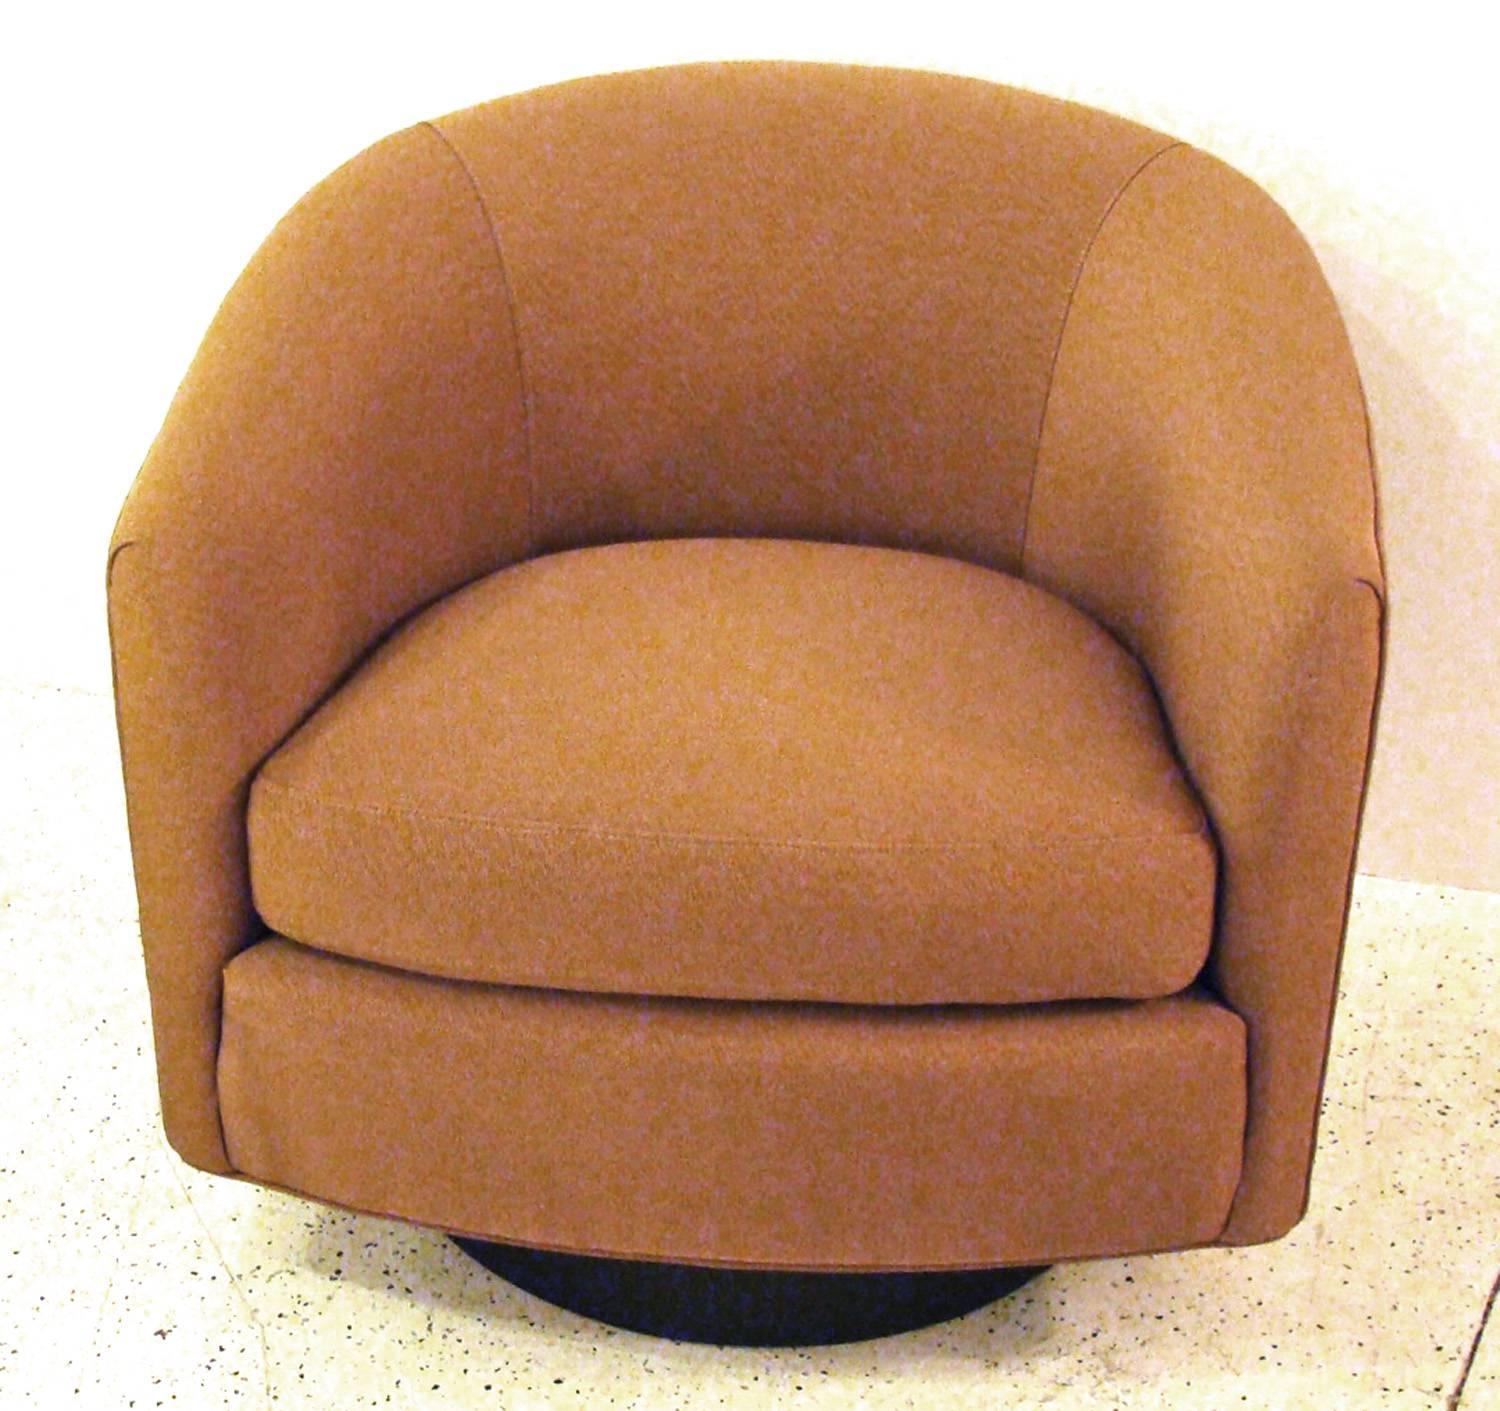 Newly renovated pair of Classic swivel chairs. Now in a durable, tightly woven 